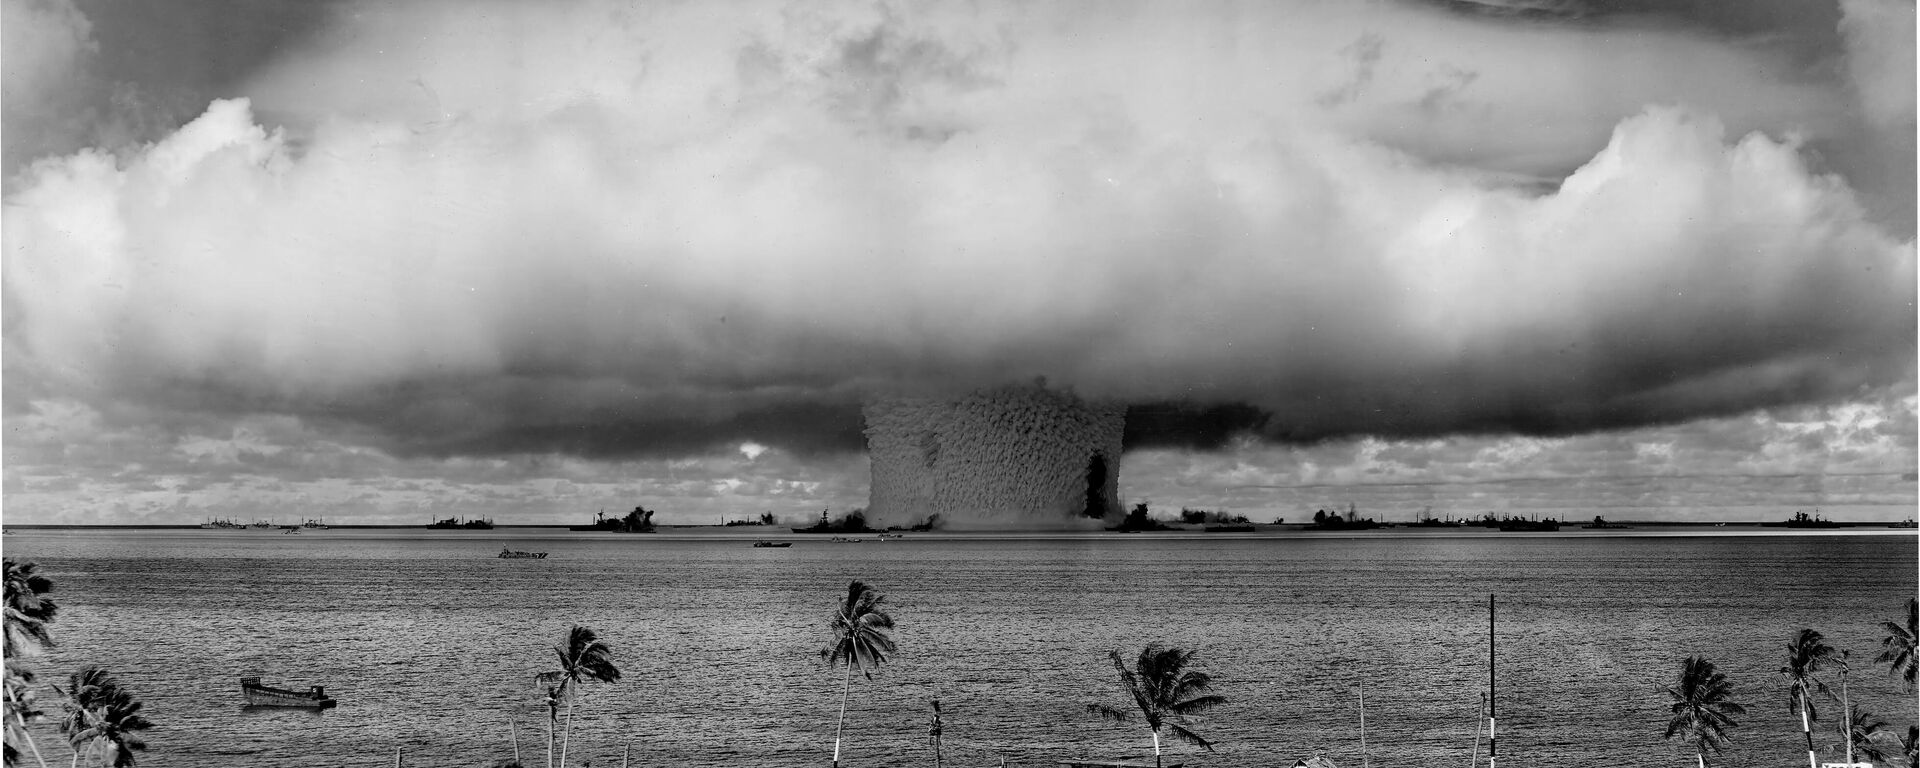 The Baker explosion, part of Operation Crossroads, a nuclear weapon test by the US military at Bikini Atoll, Micronesia, on 25 July 1946. - Sputnik International, 1920, 14.07.2023